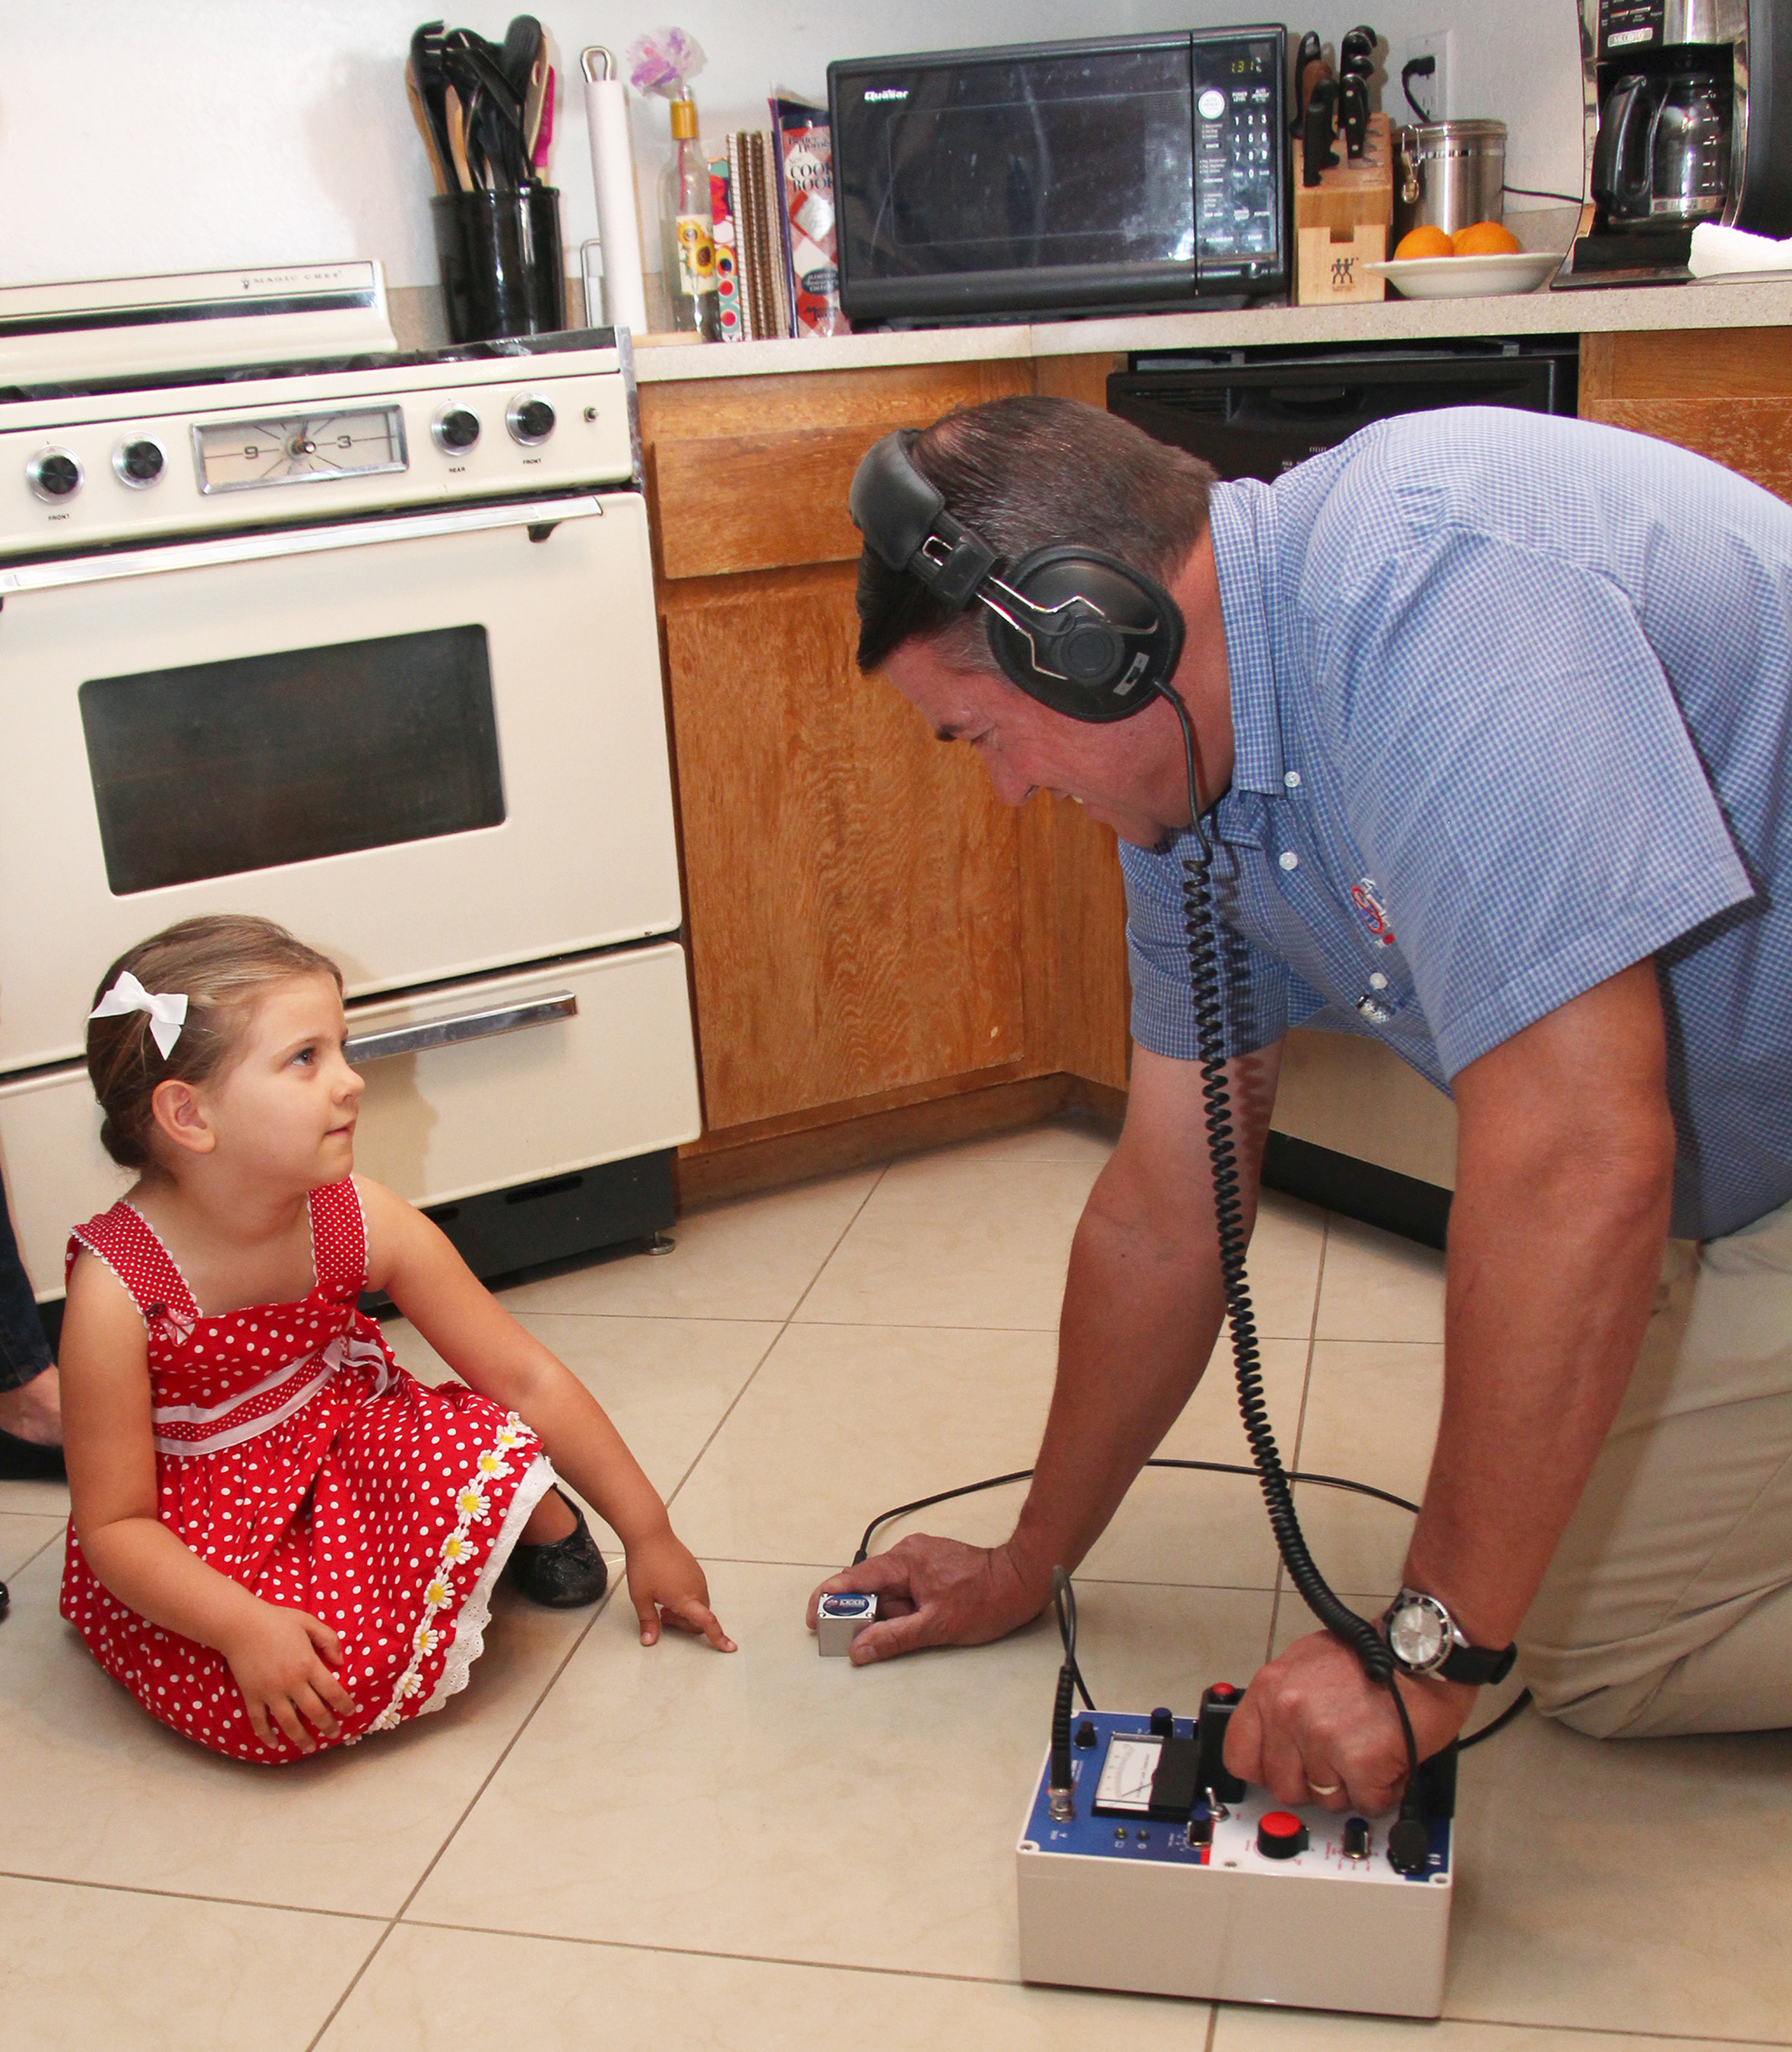 A certified specialist uses an ultrasonic microphone, along with the help of a customer, to find a slab leak. American Leak Detection offers leak detection without destruction to its customers in five countries. Since it was founded in 1974, American Leak Detection has found more than 7 million leaks in homes, government facilities and businesses worldwide.